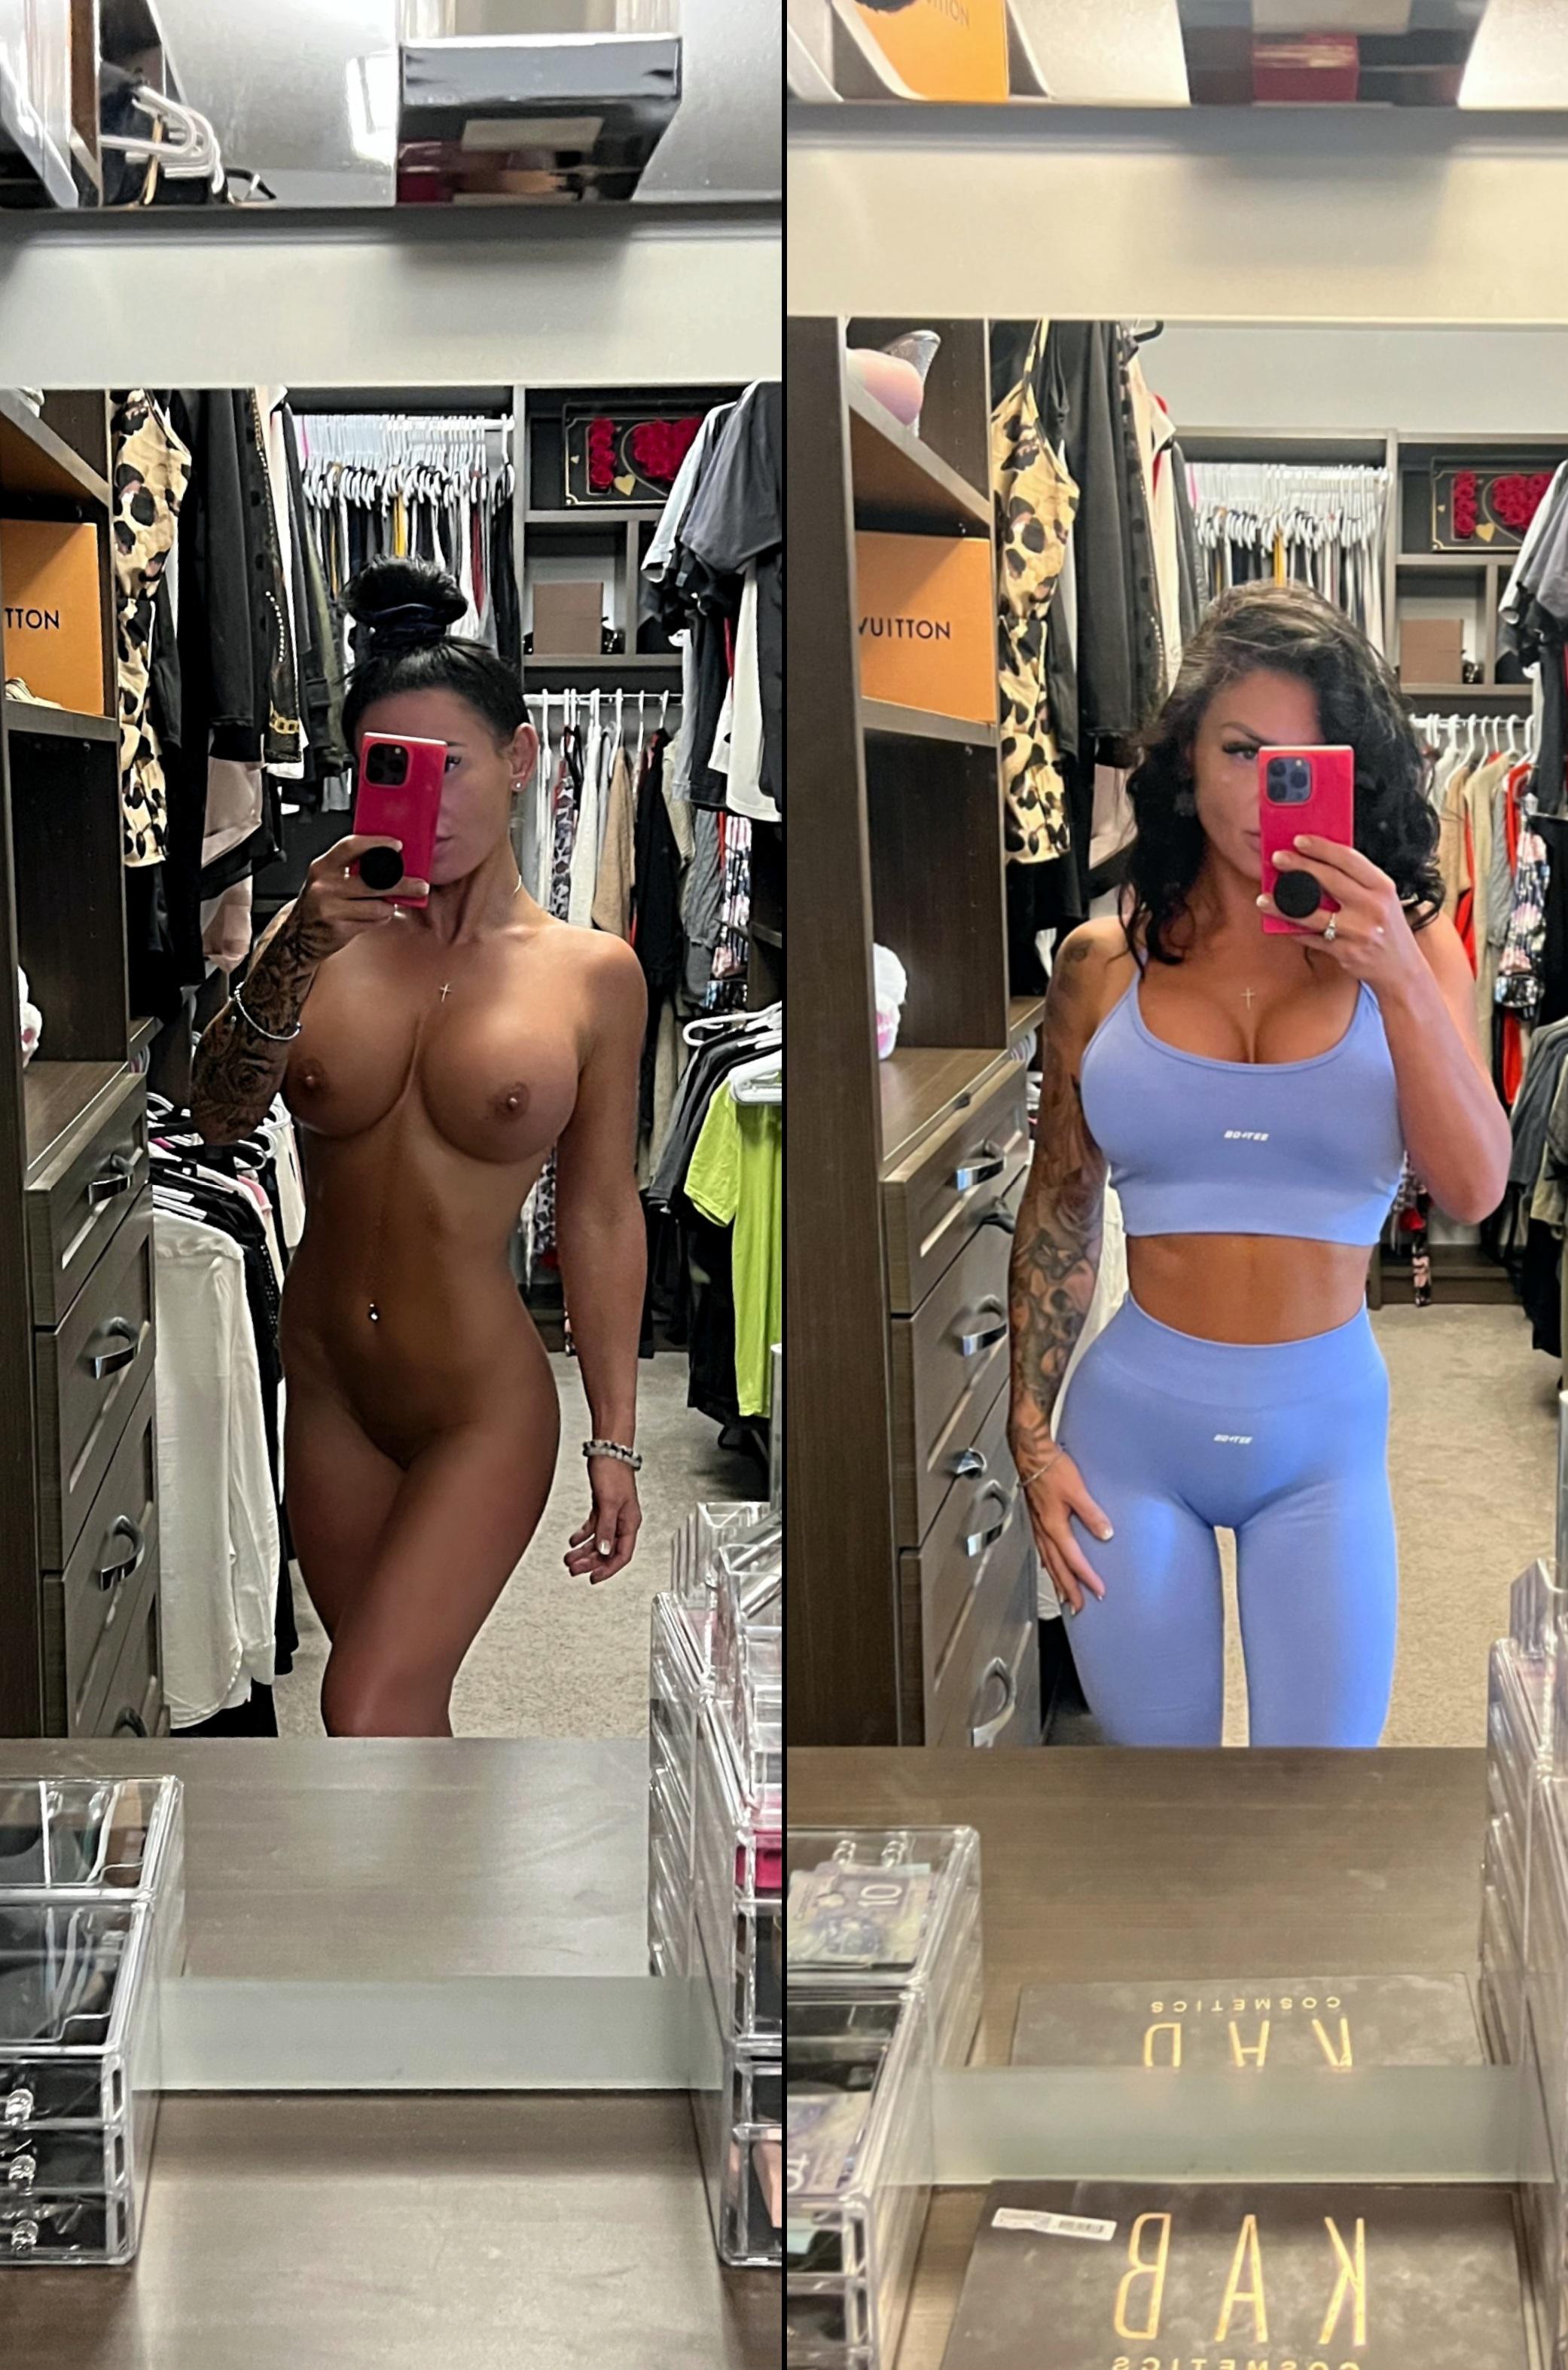 What the guys at the gym see vs what my trainer sees during Ch3ck ins